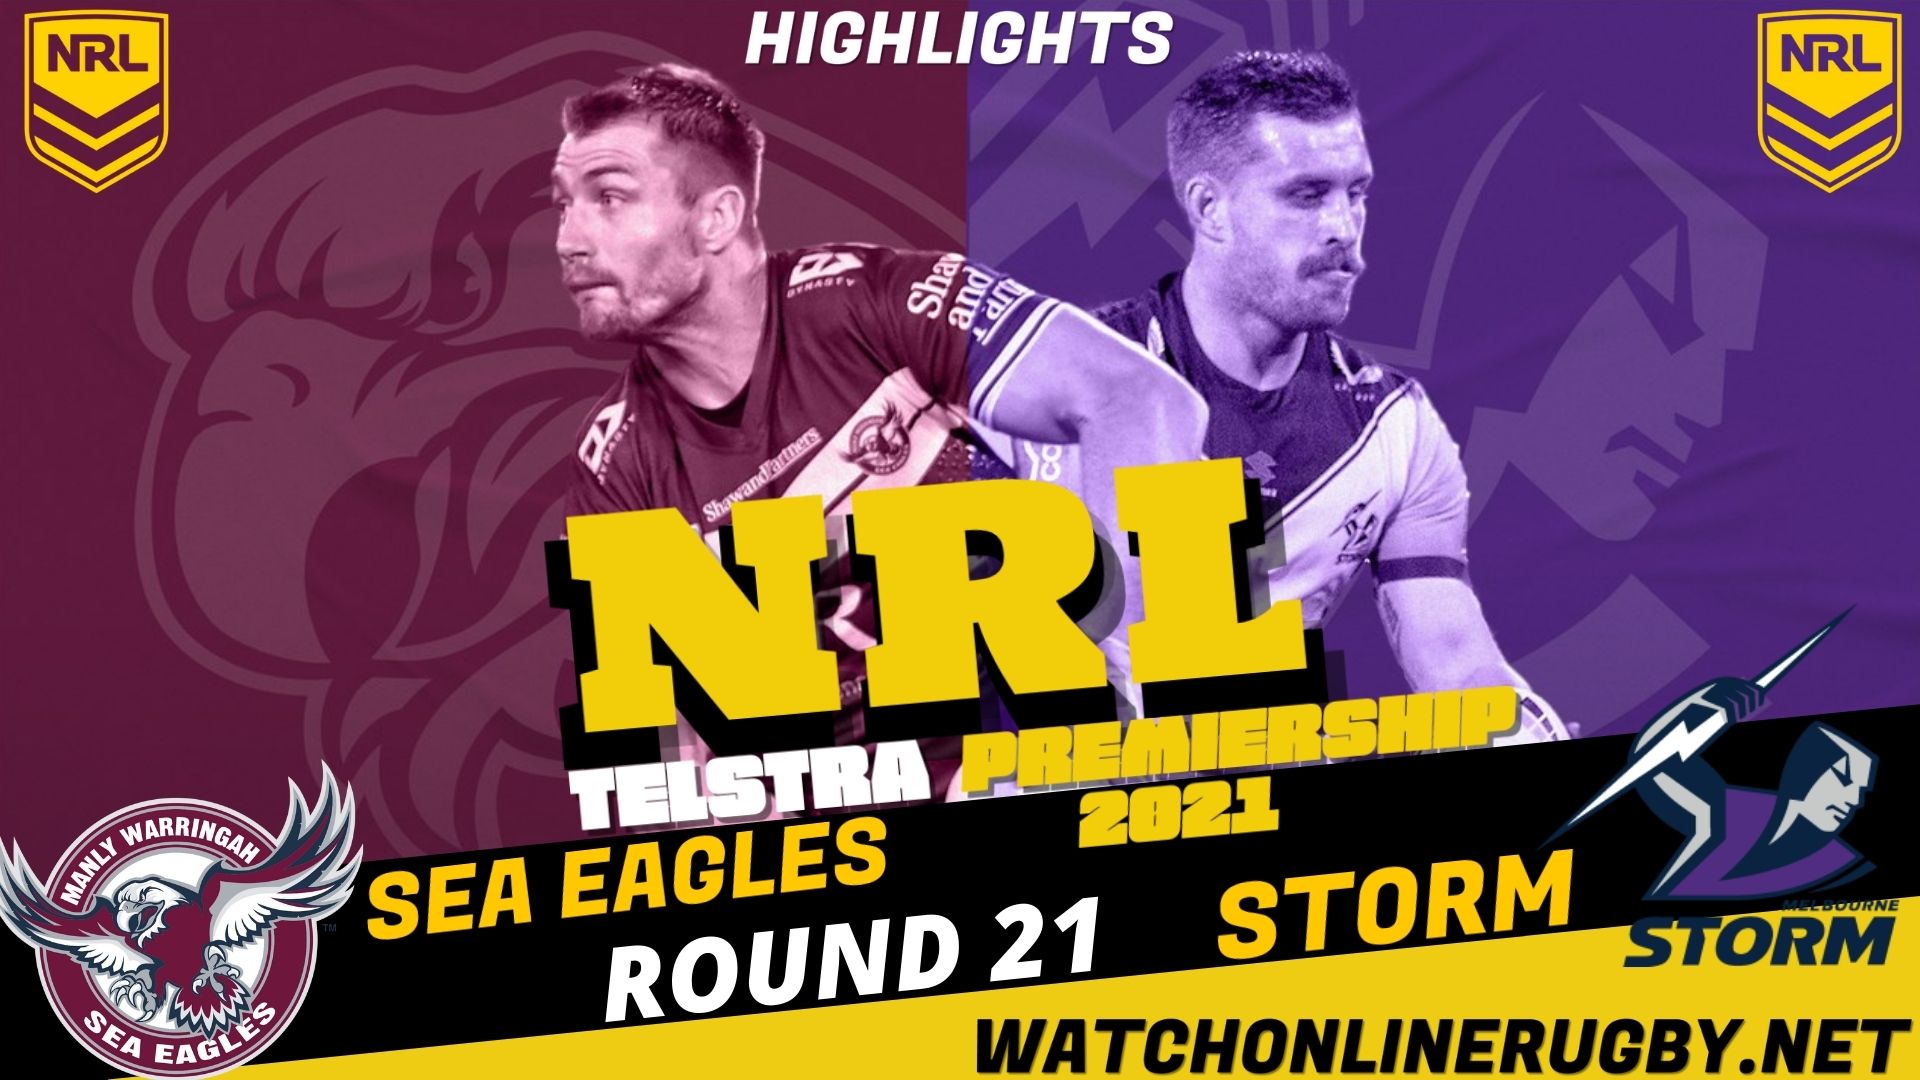 Sea Eagles Vs Storm Highlights RD 21 NRL Rugby